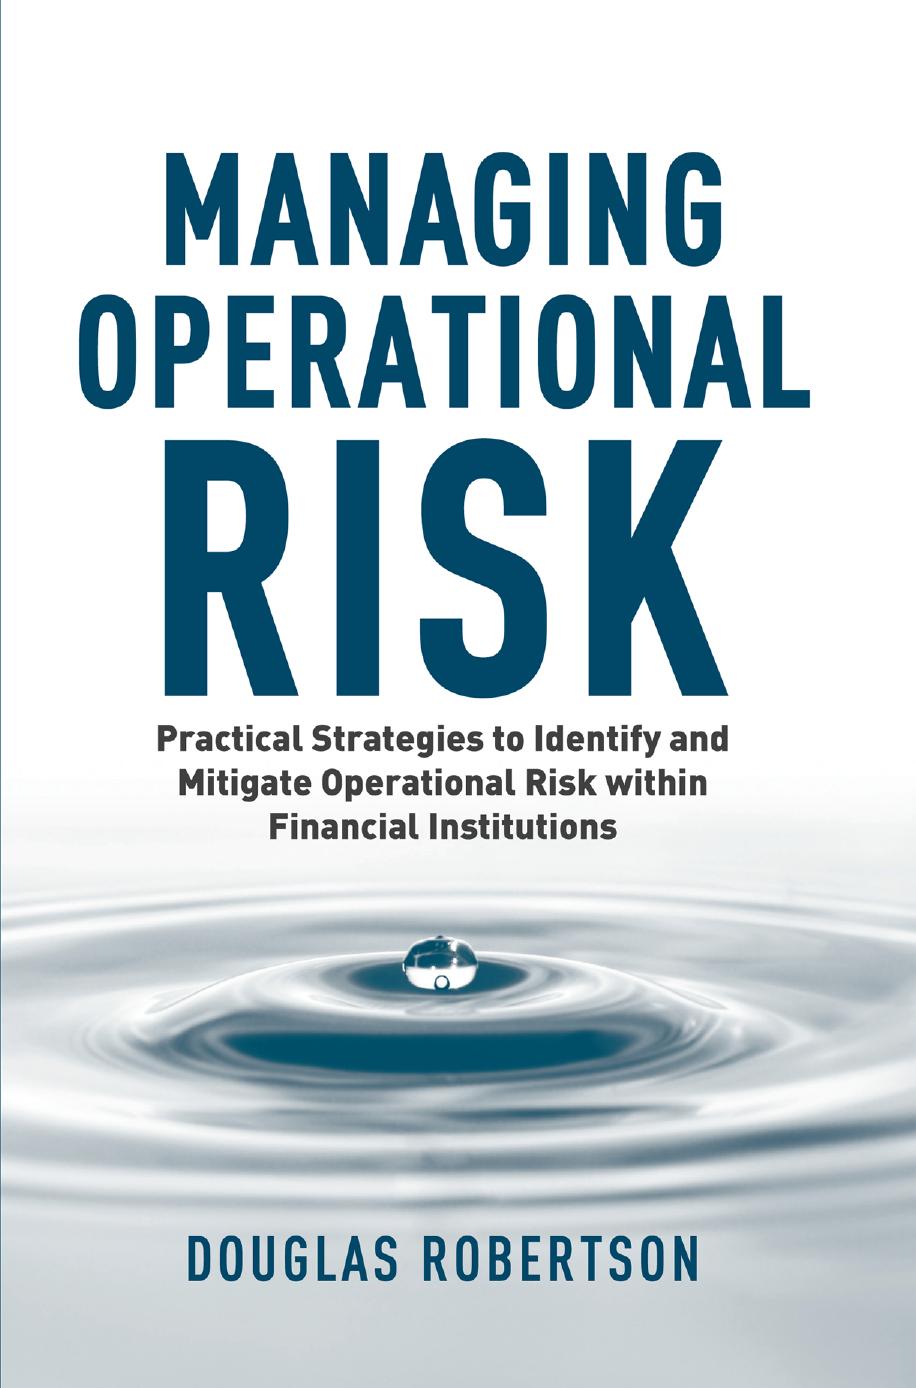 Managing Operational Risk Practical Strategies to Identify and Mitigate Operational Risk within Financial Institutions 2016